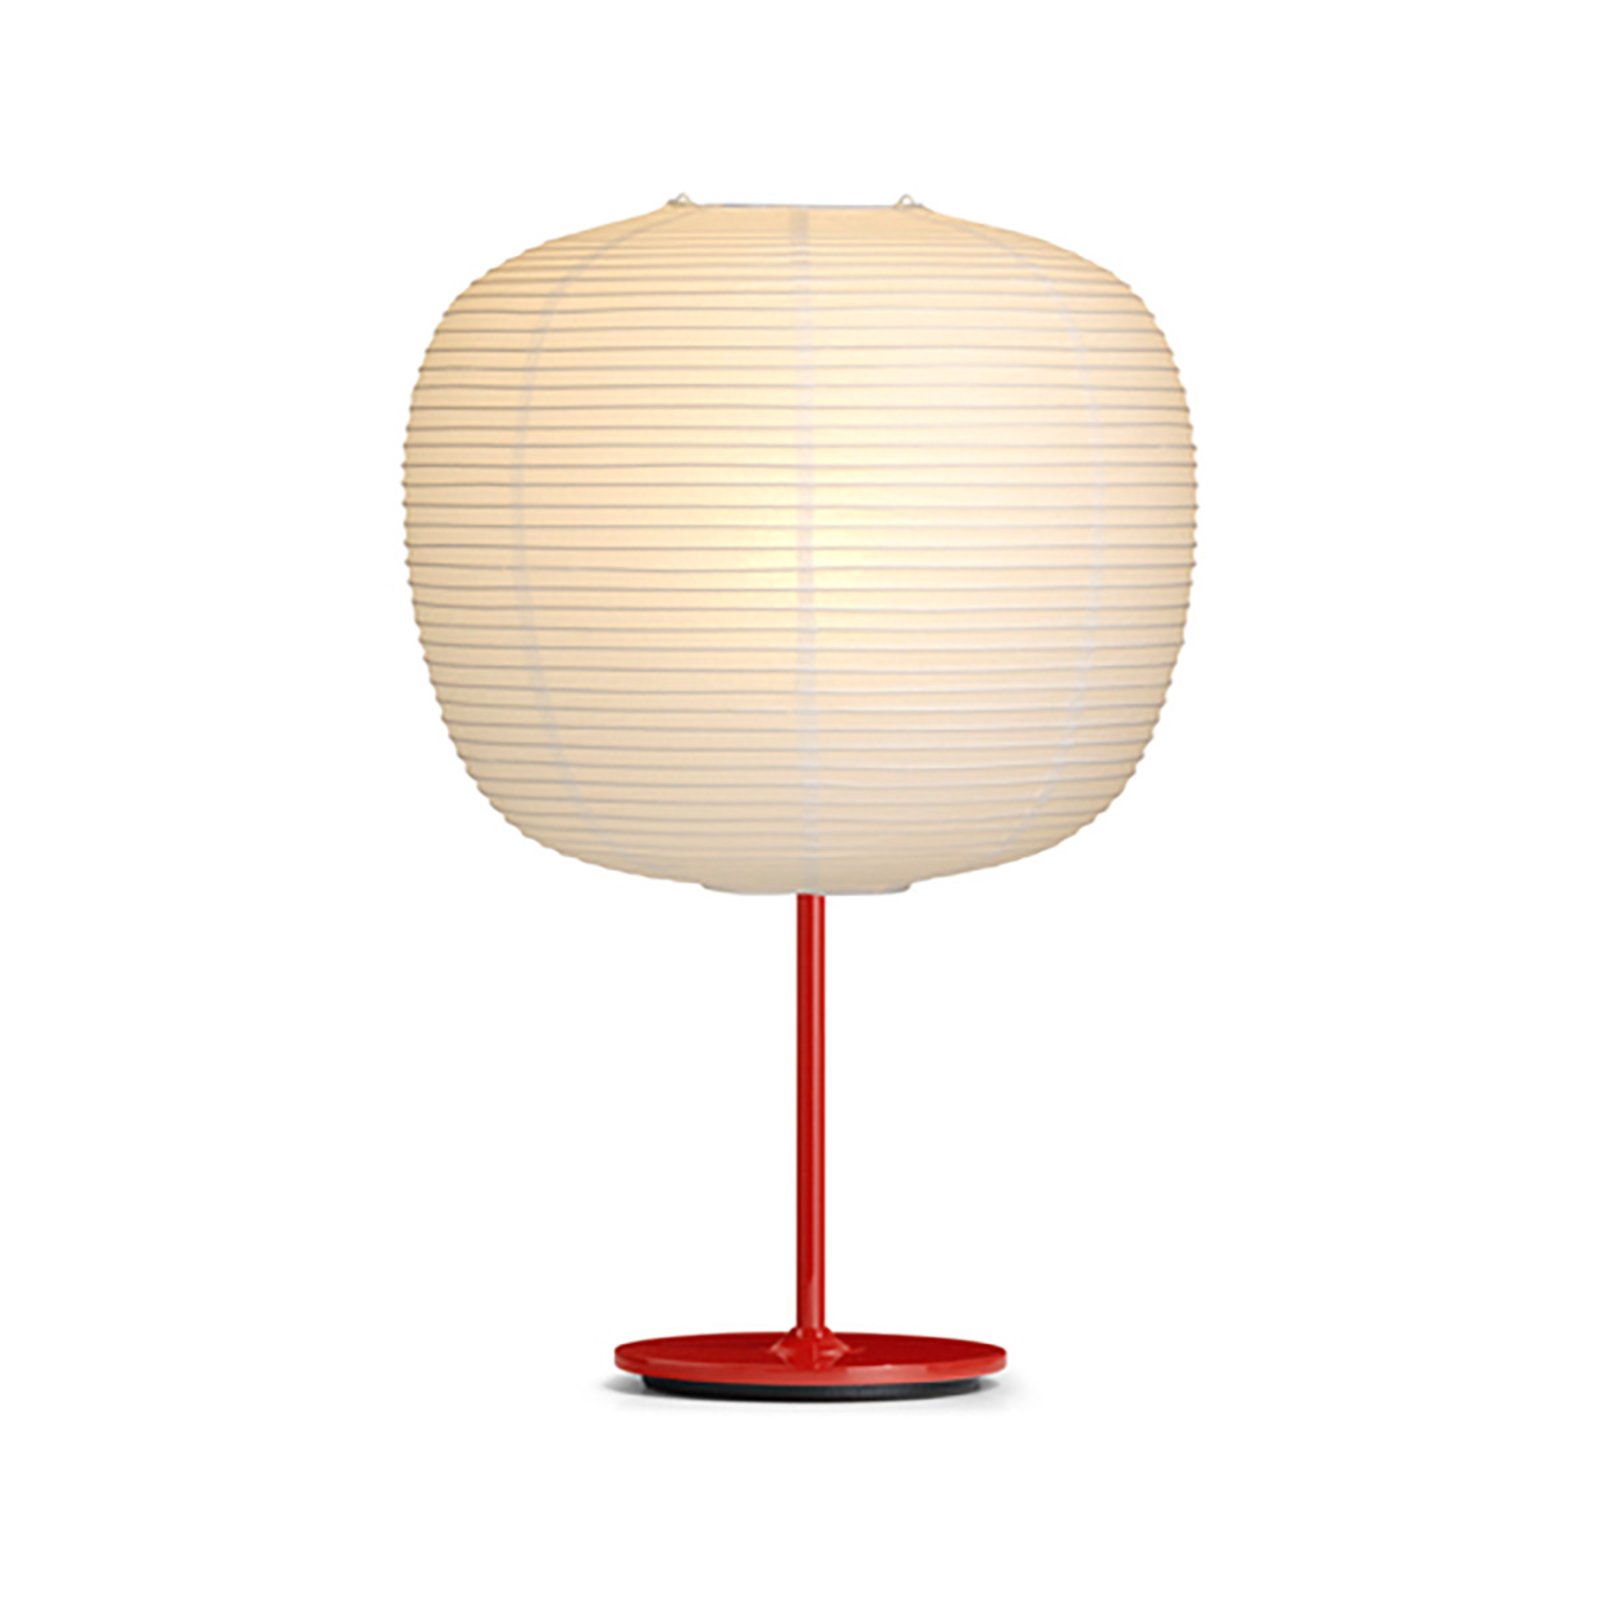 HAY Common Table abat-jour Peach, rouge signal